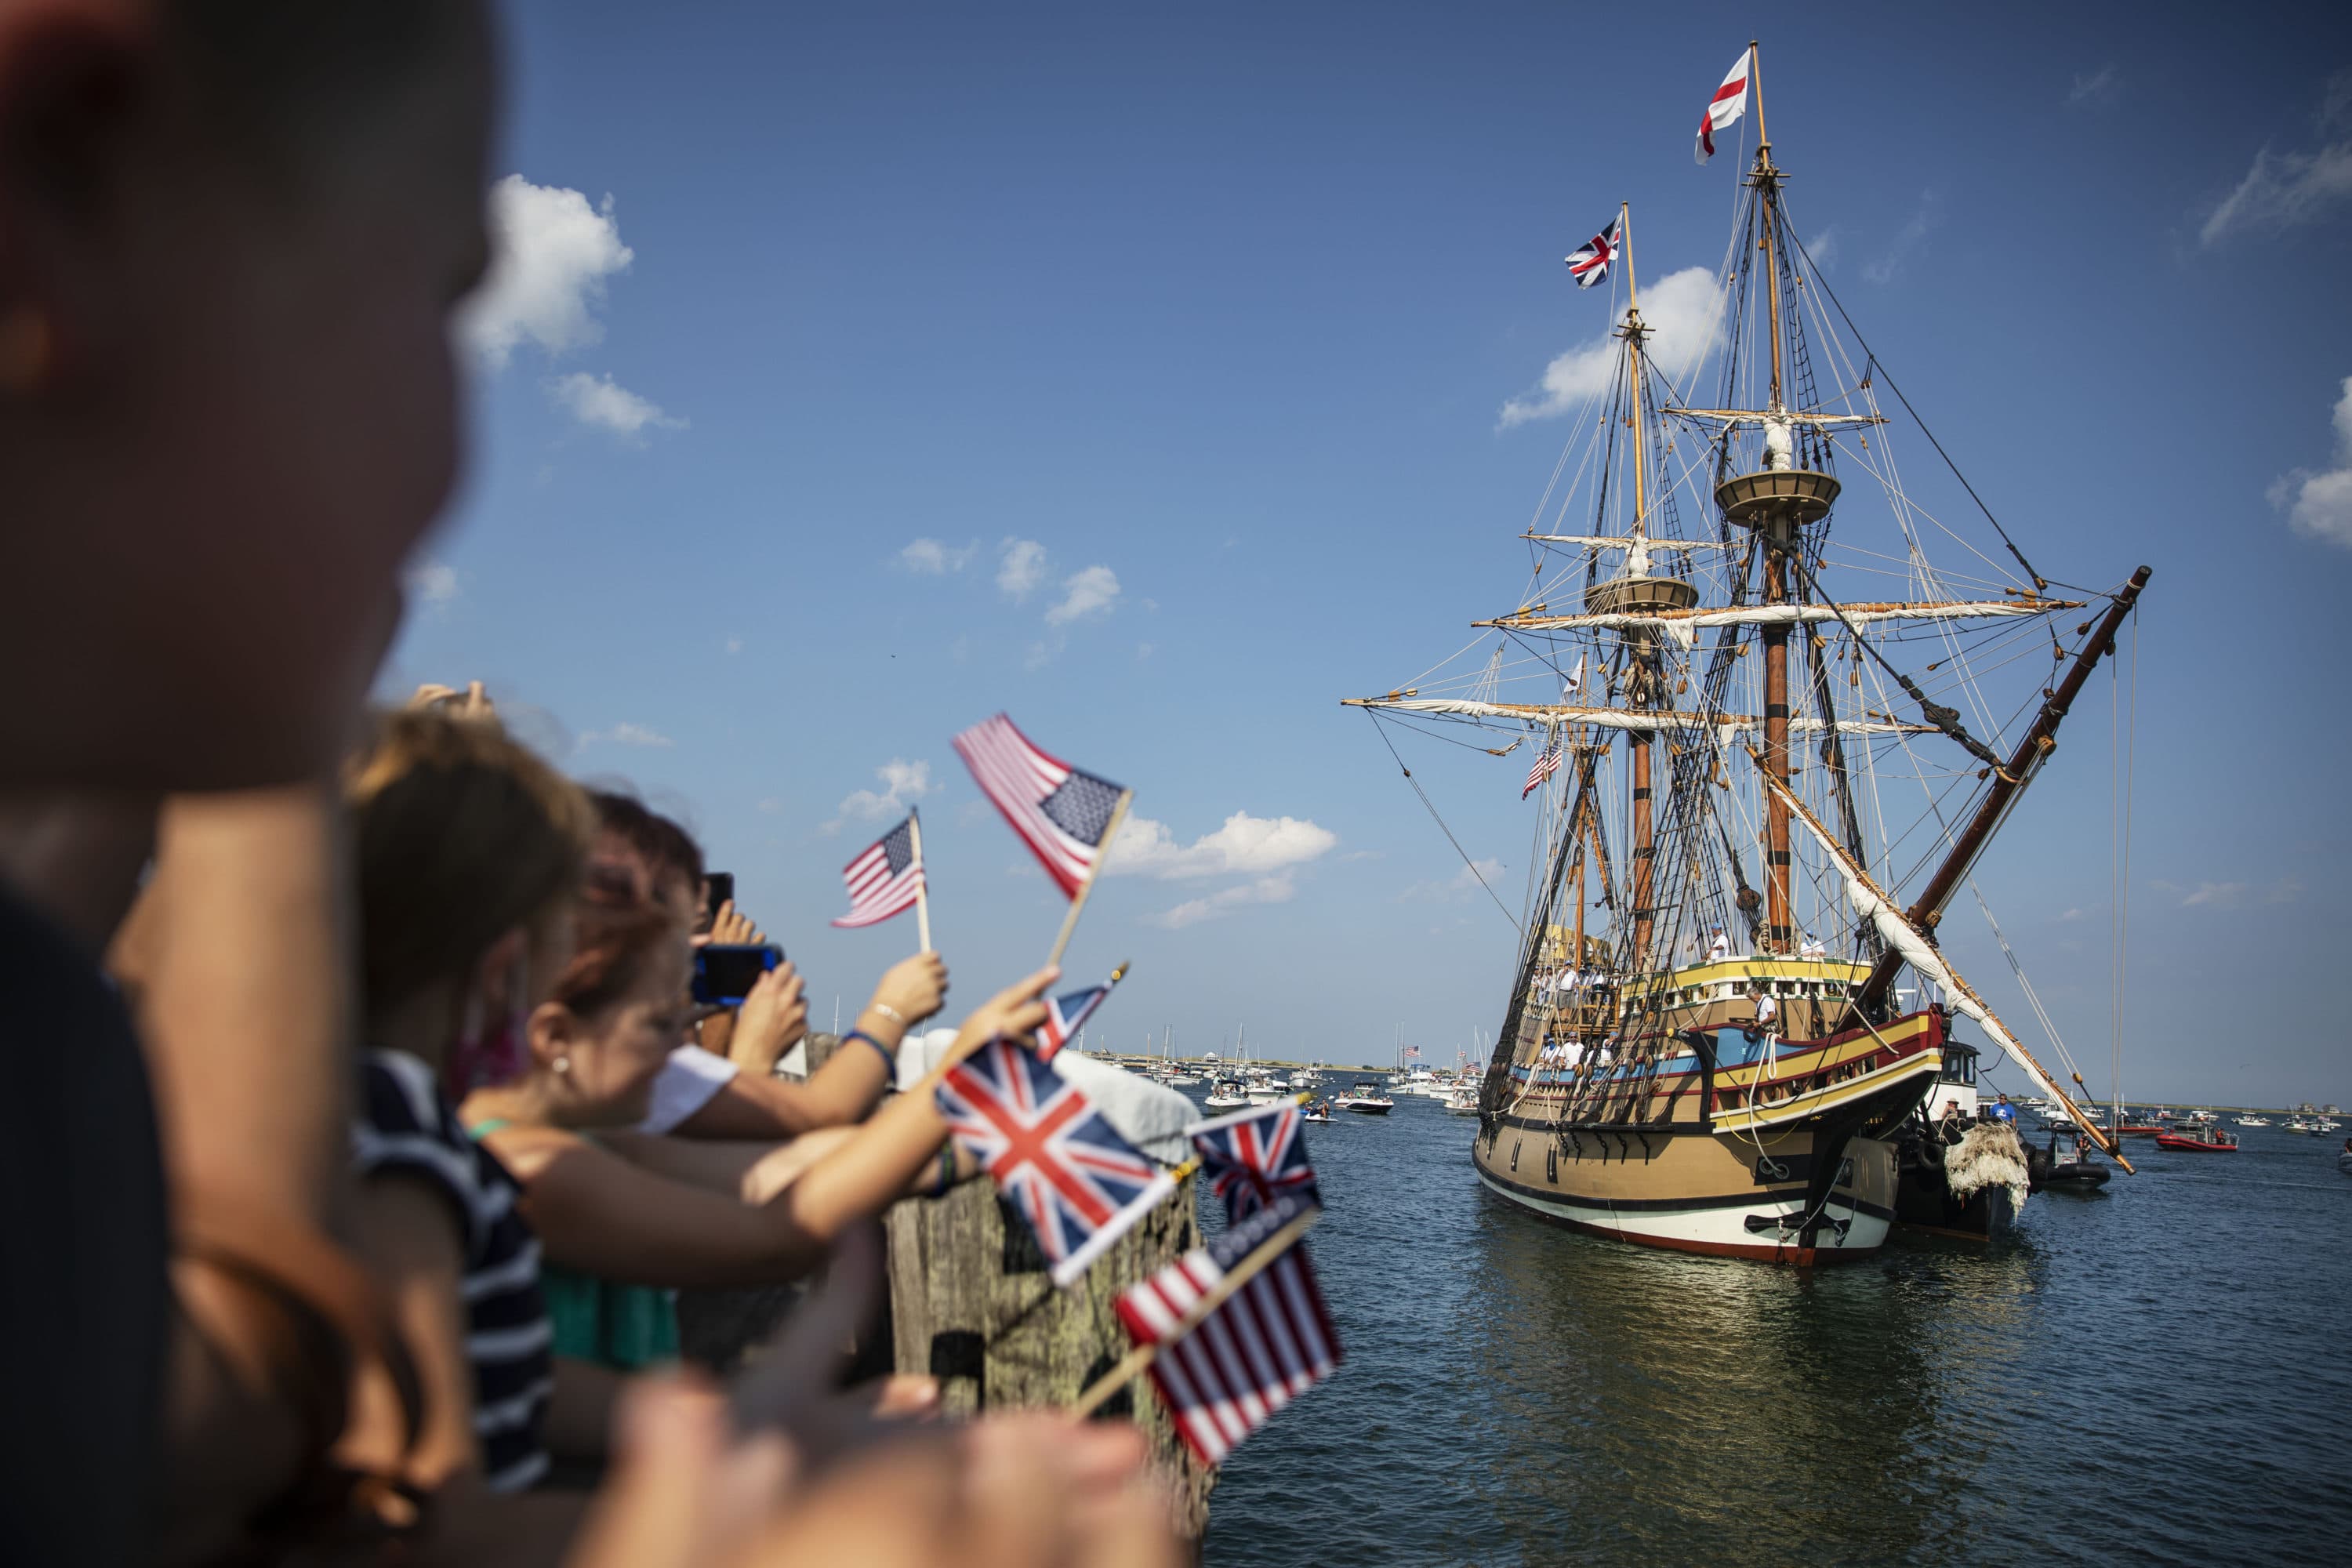 The Mayflower II, a replica of the original Mayflower ship that brought the Pilgrims to America 400 year ago, sails into Plymouth on Monday, Aug. 10, as it returns home following extensive renovations. (David Goldman/AP)